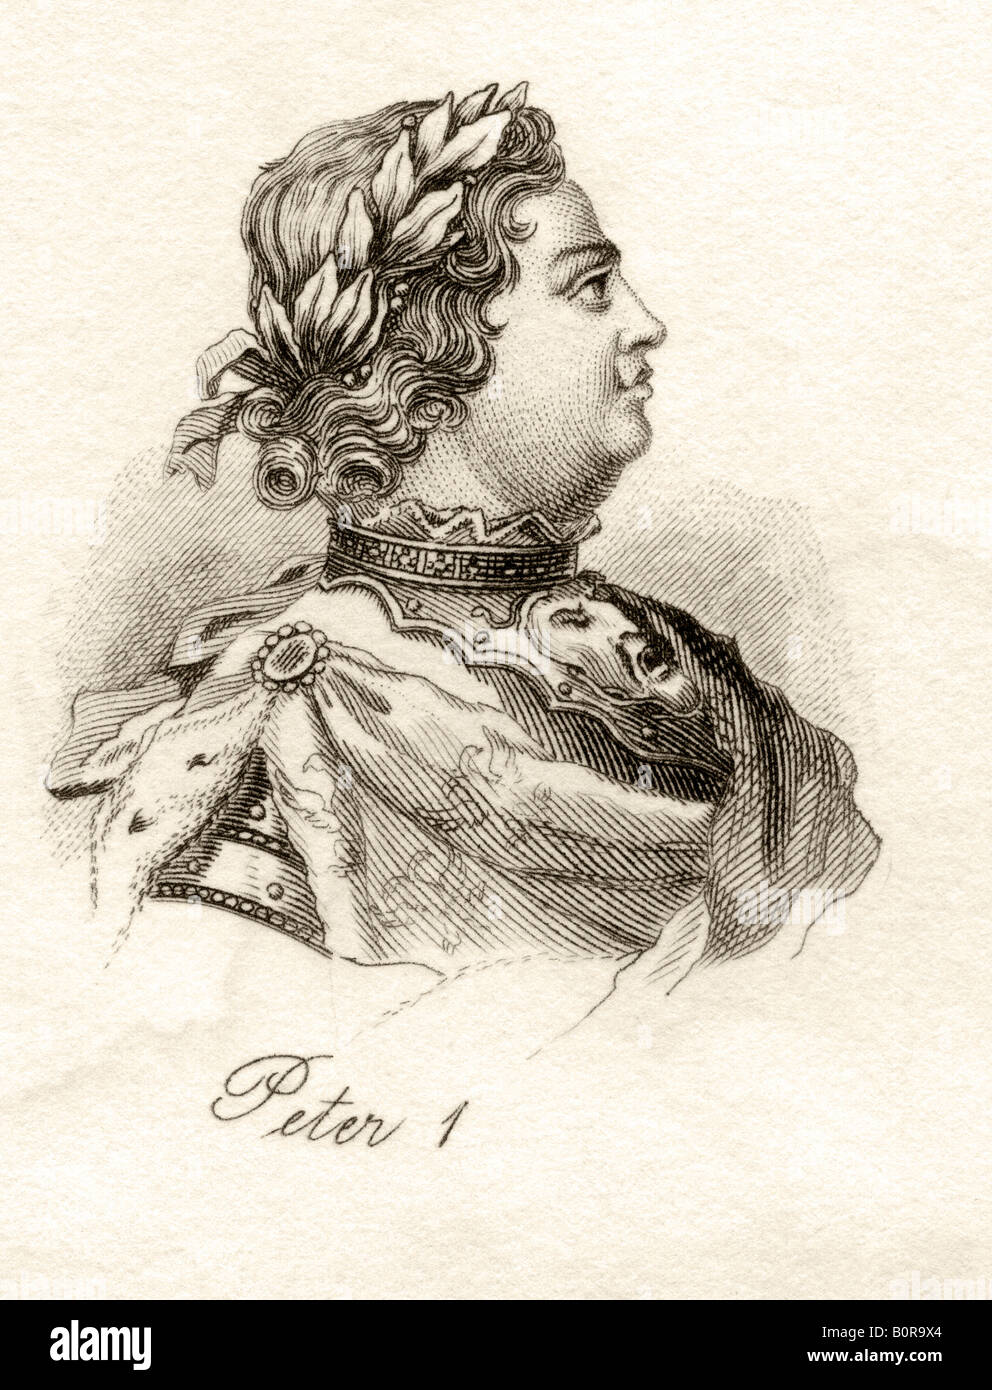 Peter I or Peter the Great, 1672 - 1725. Tsar of Russia, 1682 - 1725. From the book Crabbs Historical Dictionary, published 1825. Stock Photo